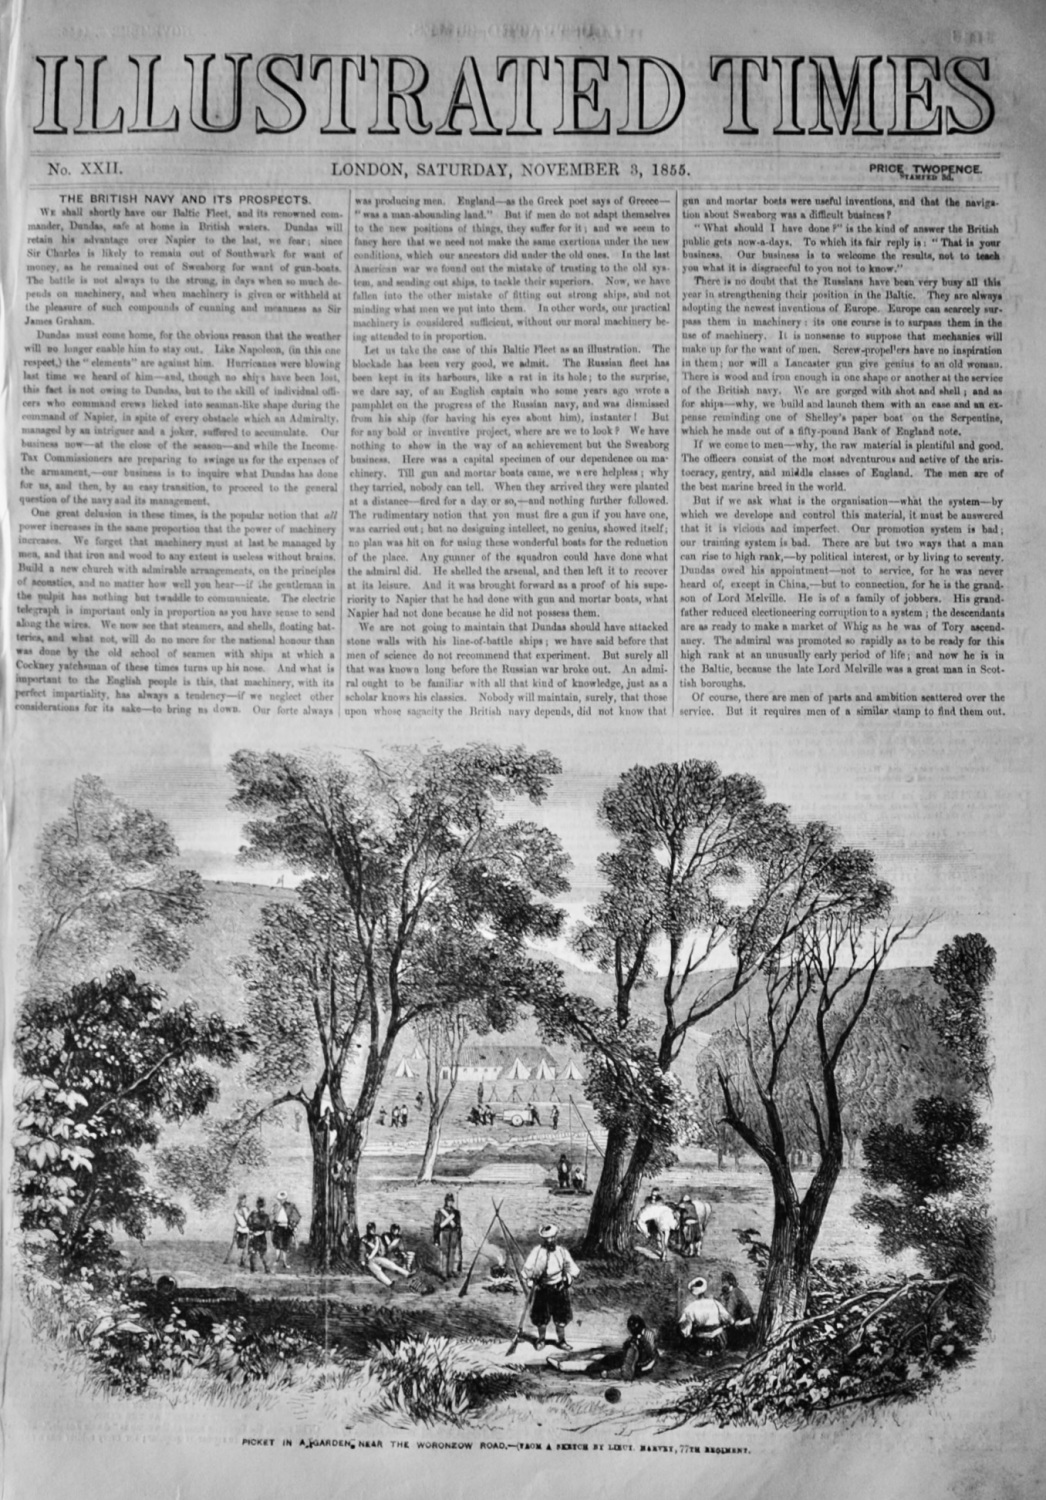 Illustrated Times, November 3rd, 1855.